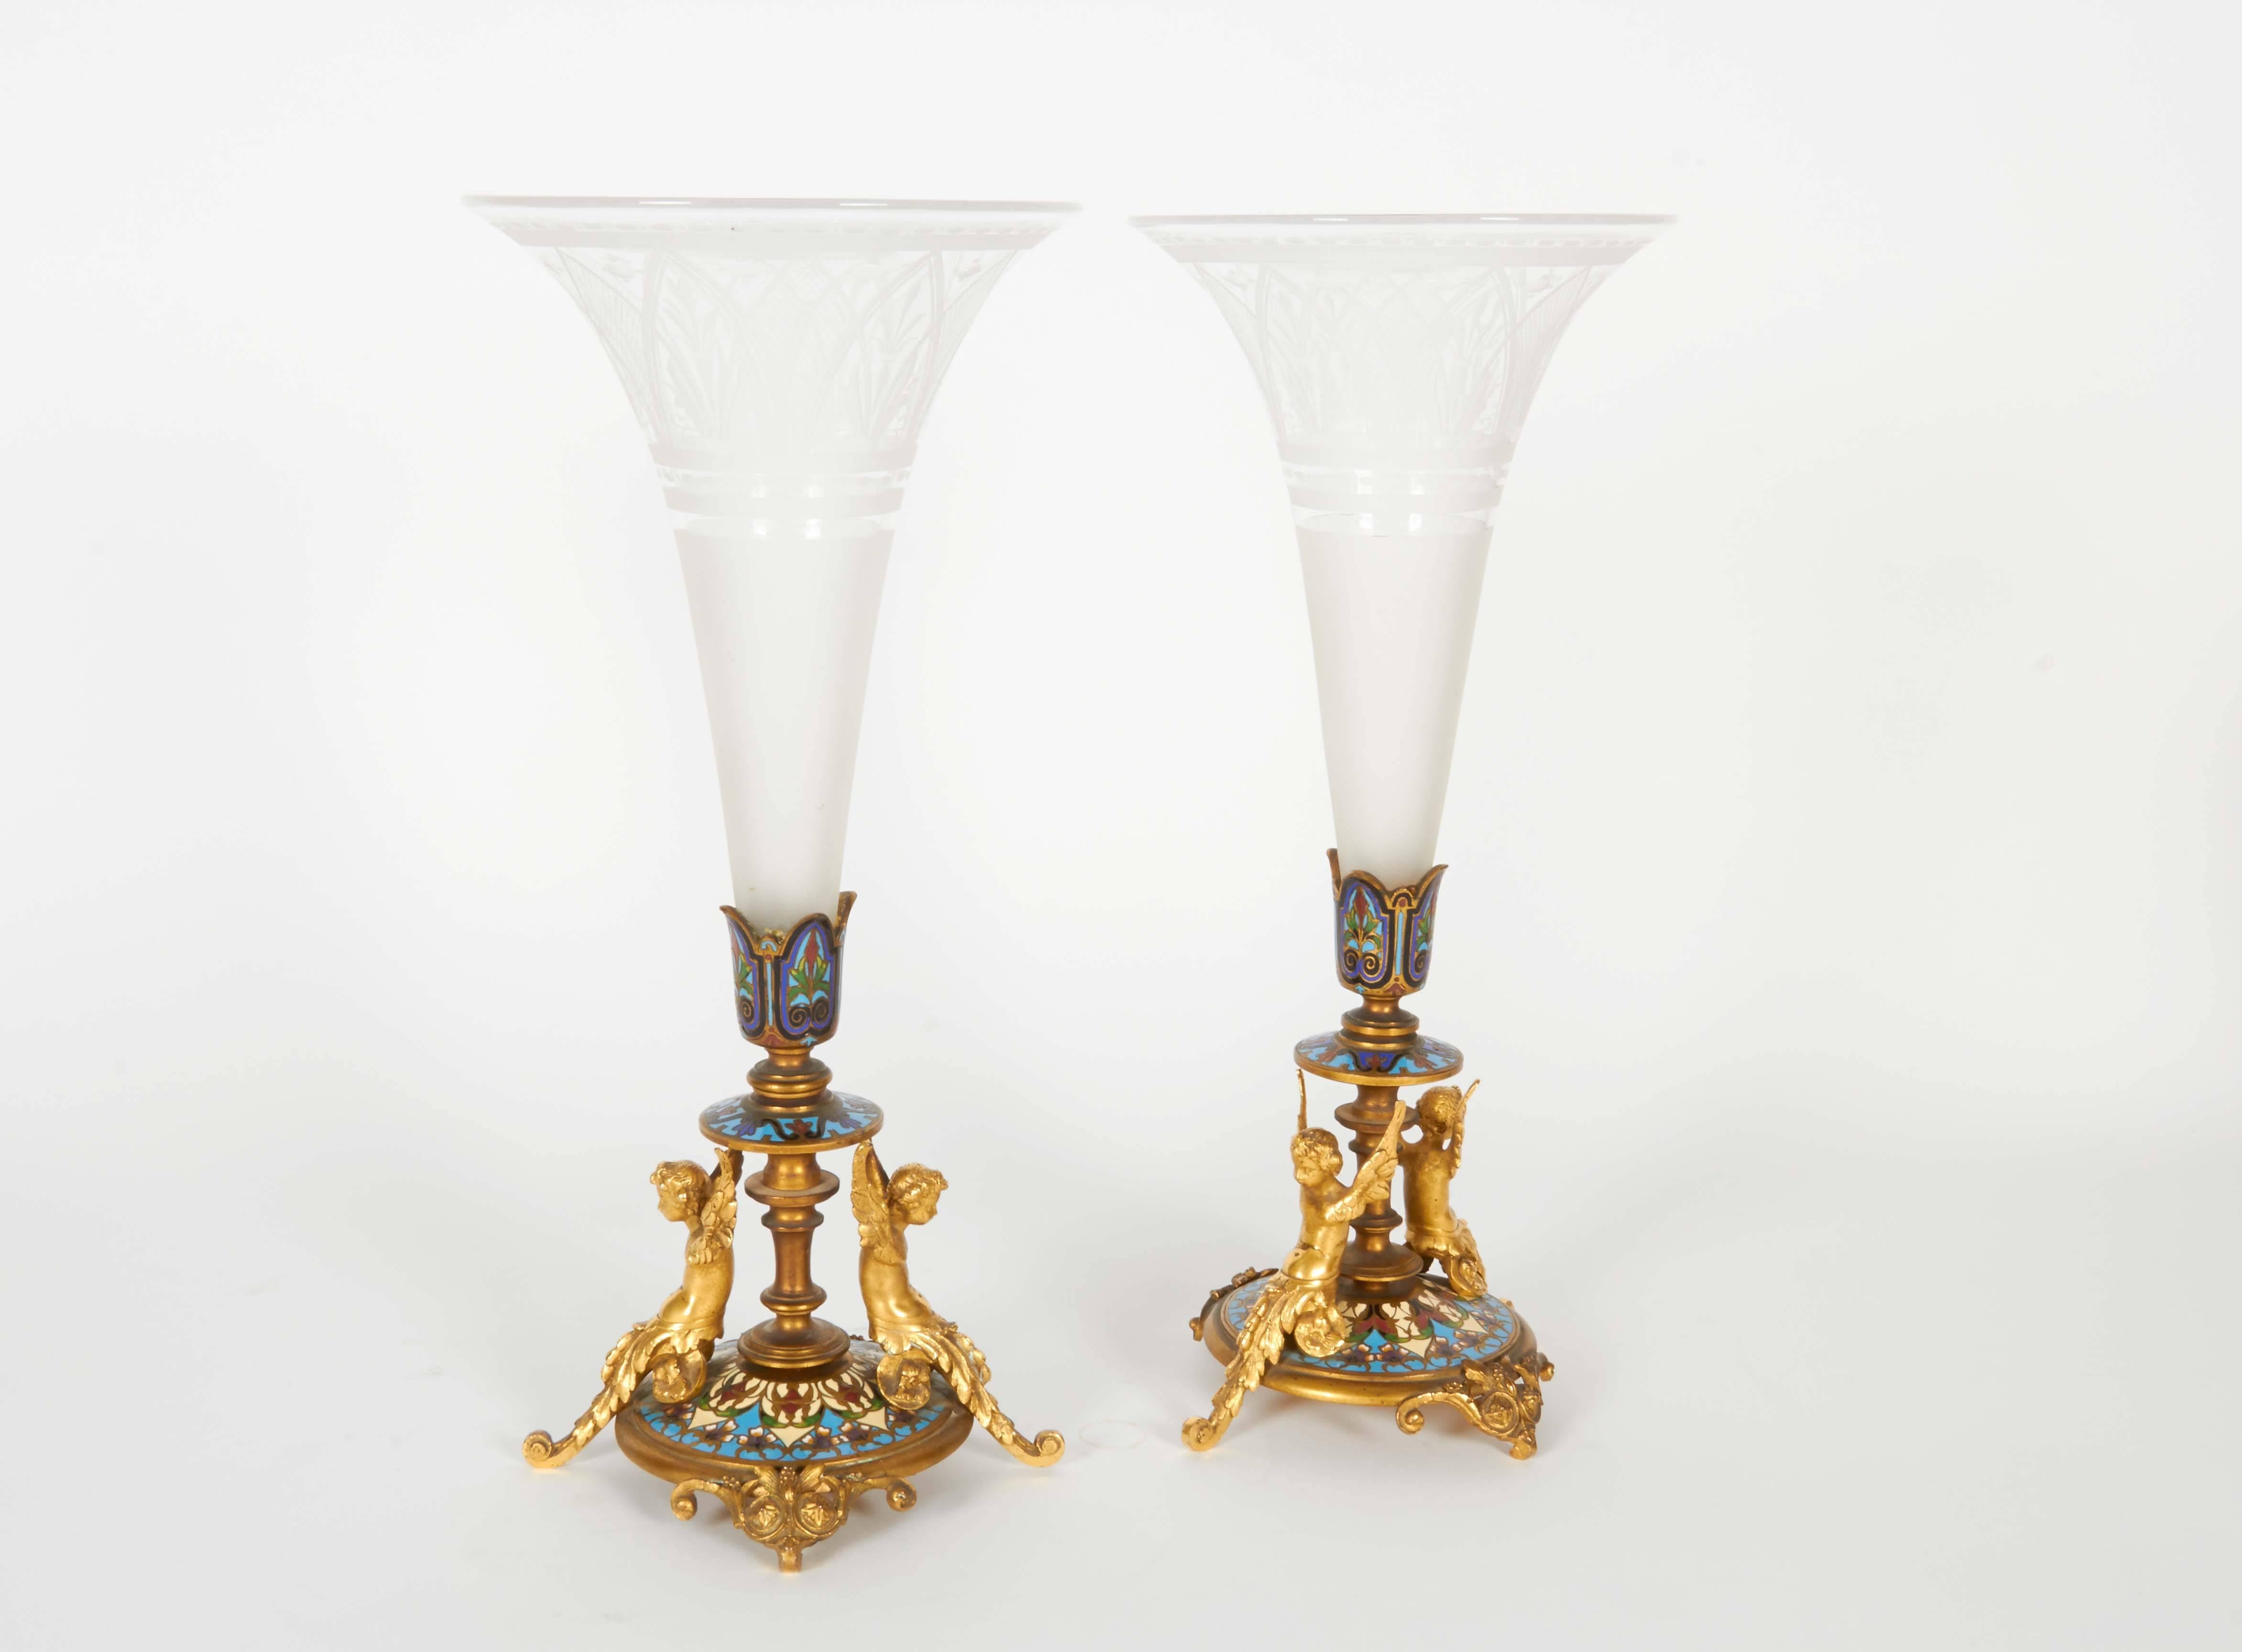 Very nice pair of French ormolu champleve / cloisonne enamel vases with original frosted glass inserts.

 